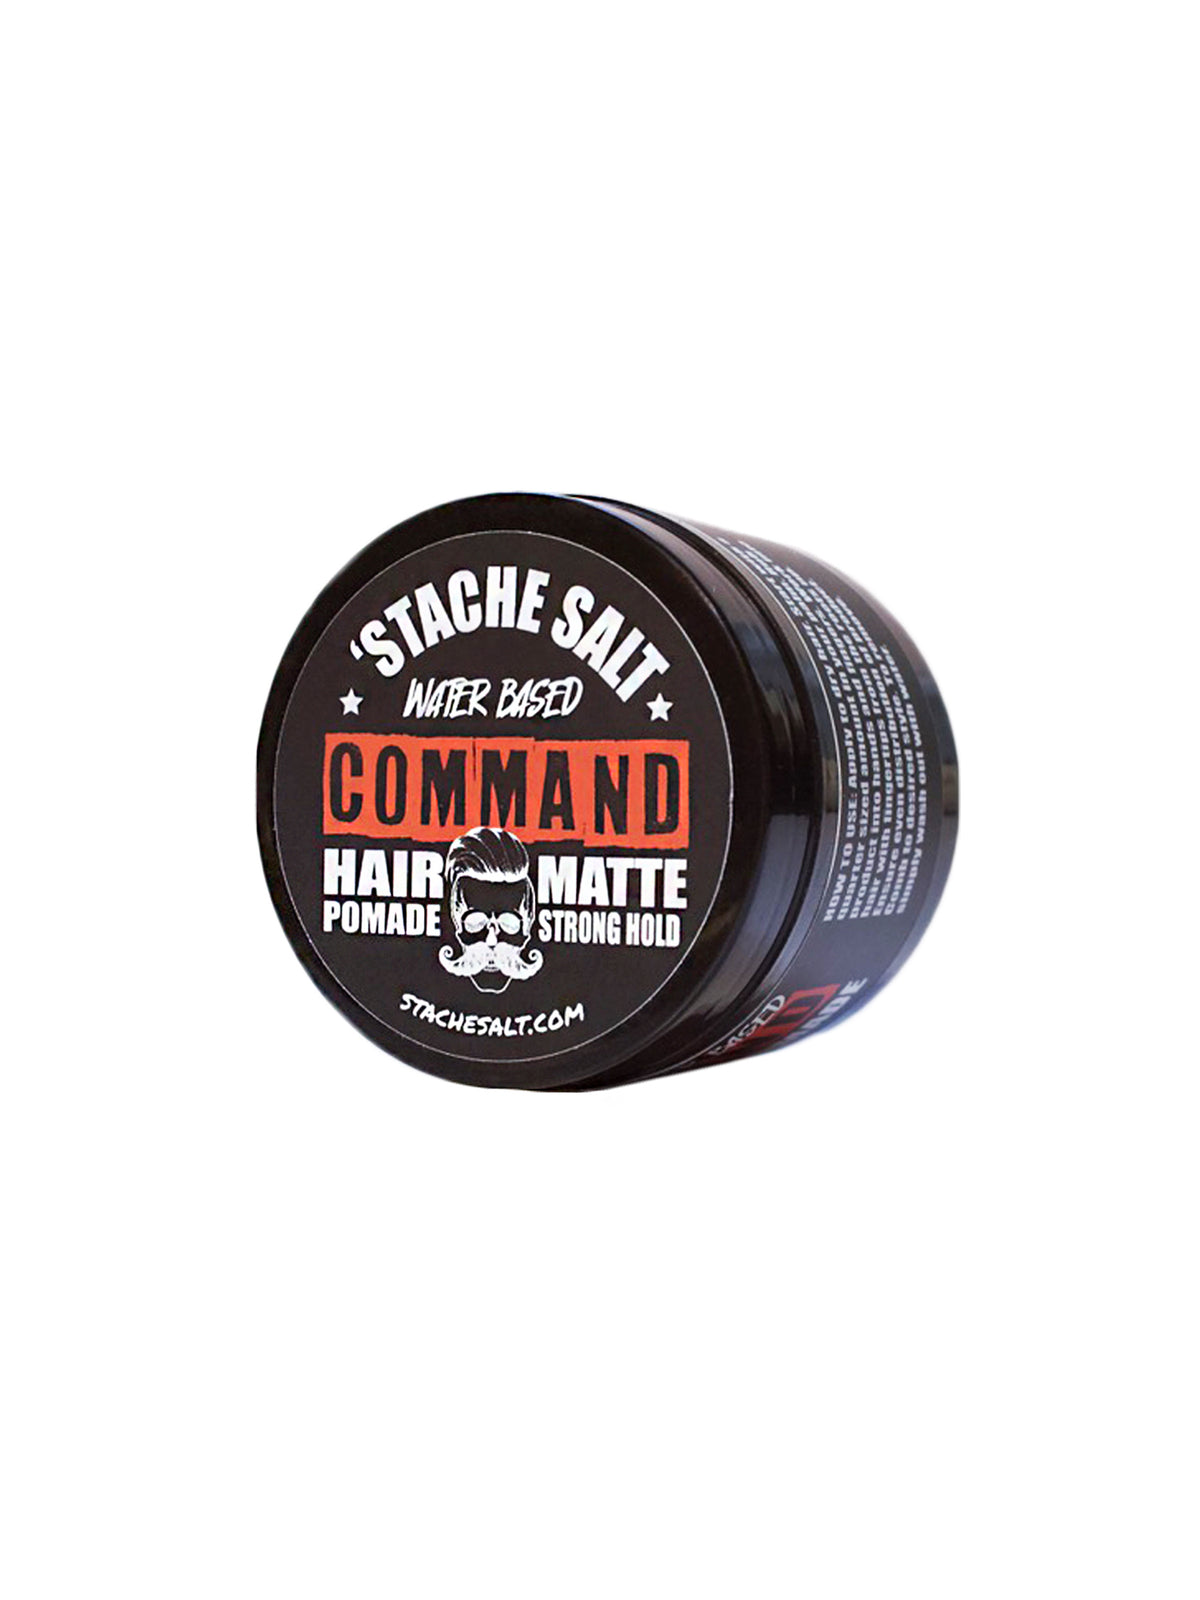 Command Hair Pomade - Water Based